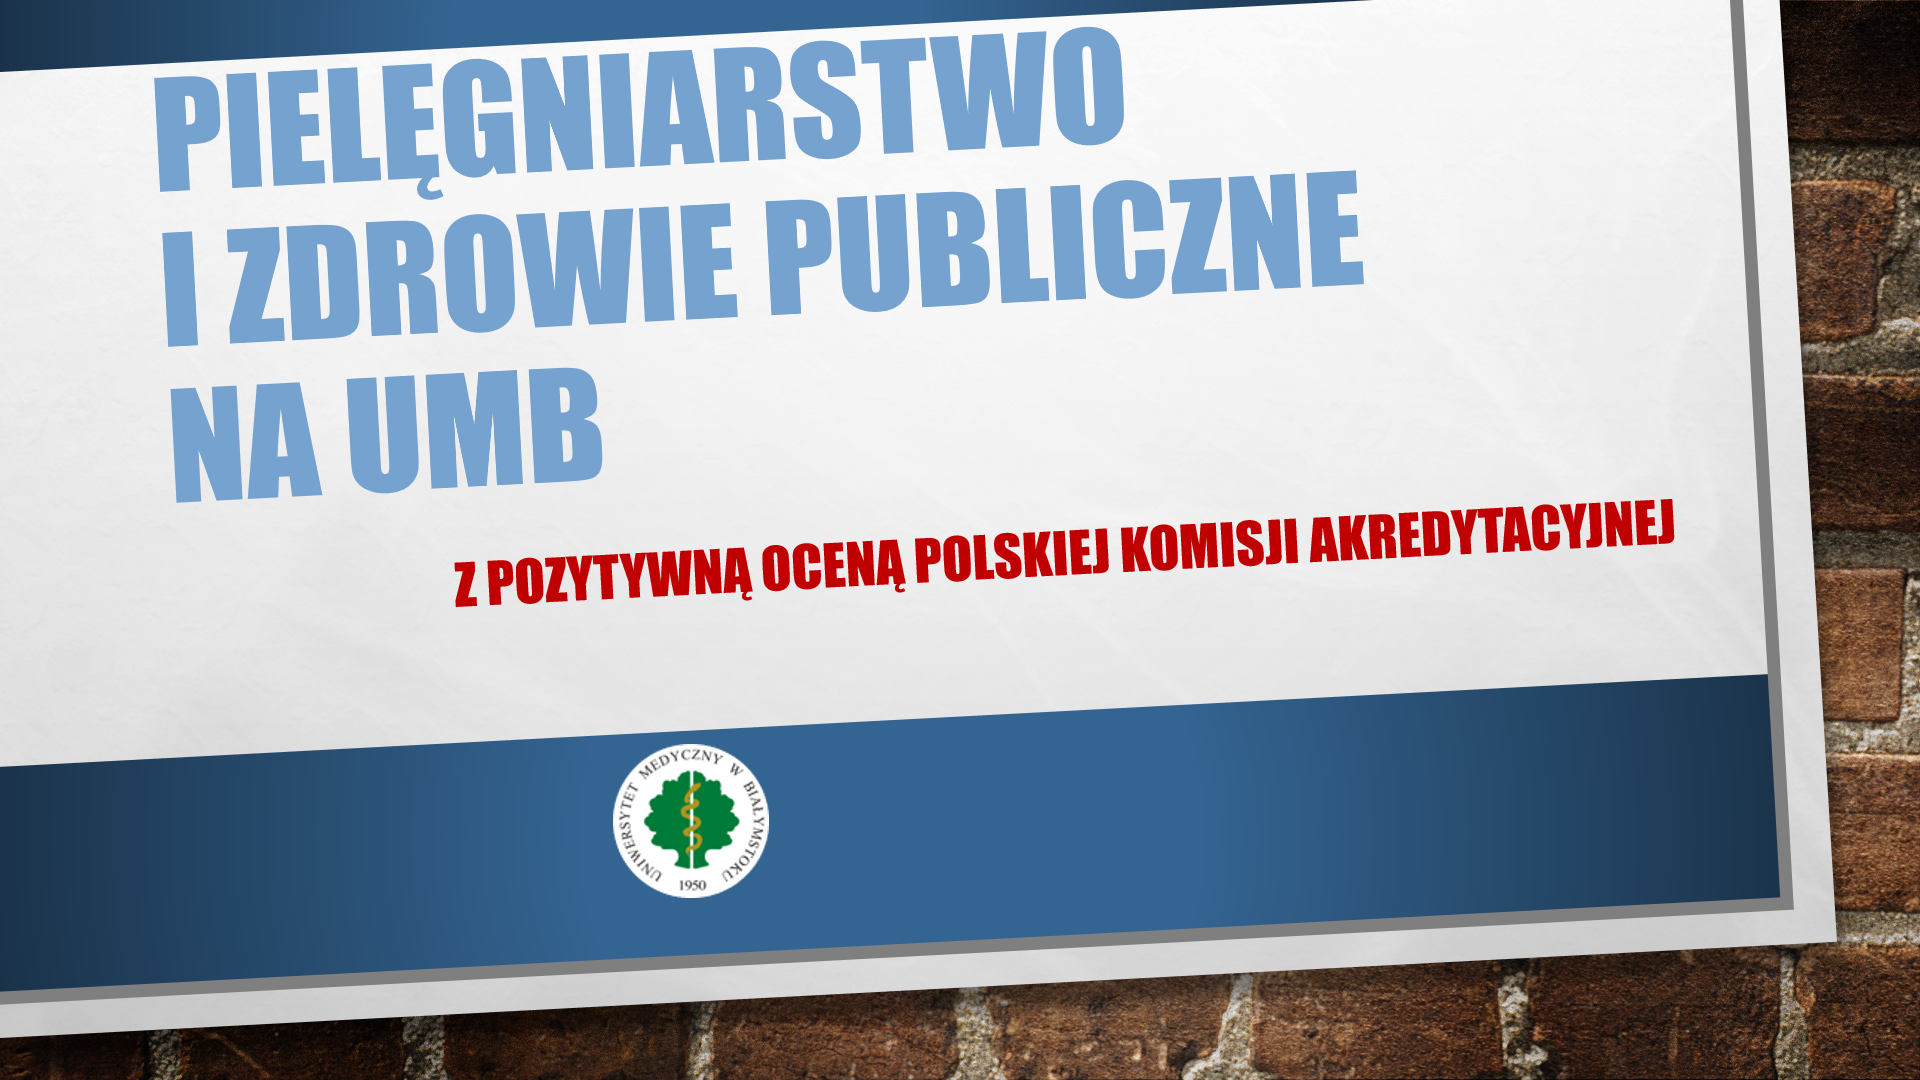 Nursing and Public Health received a positive assessment of the Polish Accreditation Committee